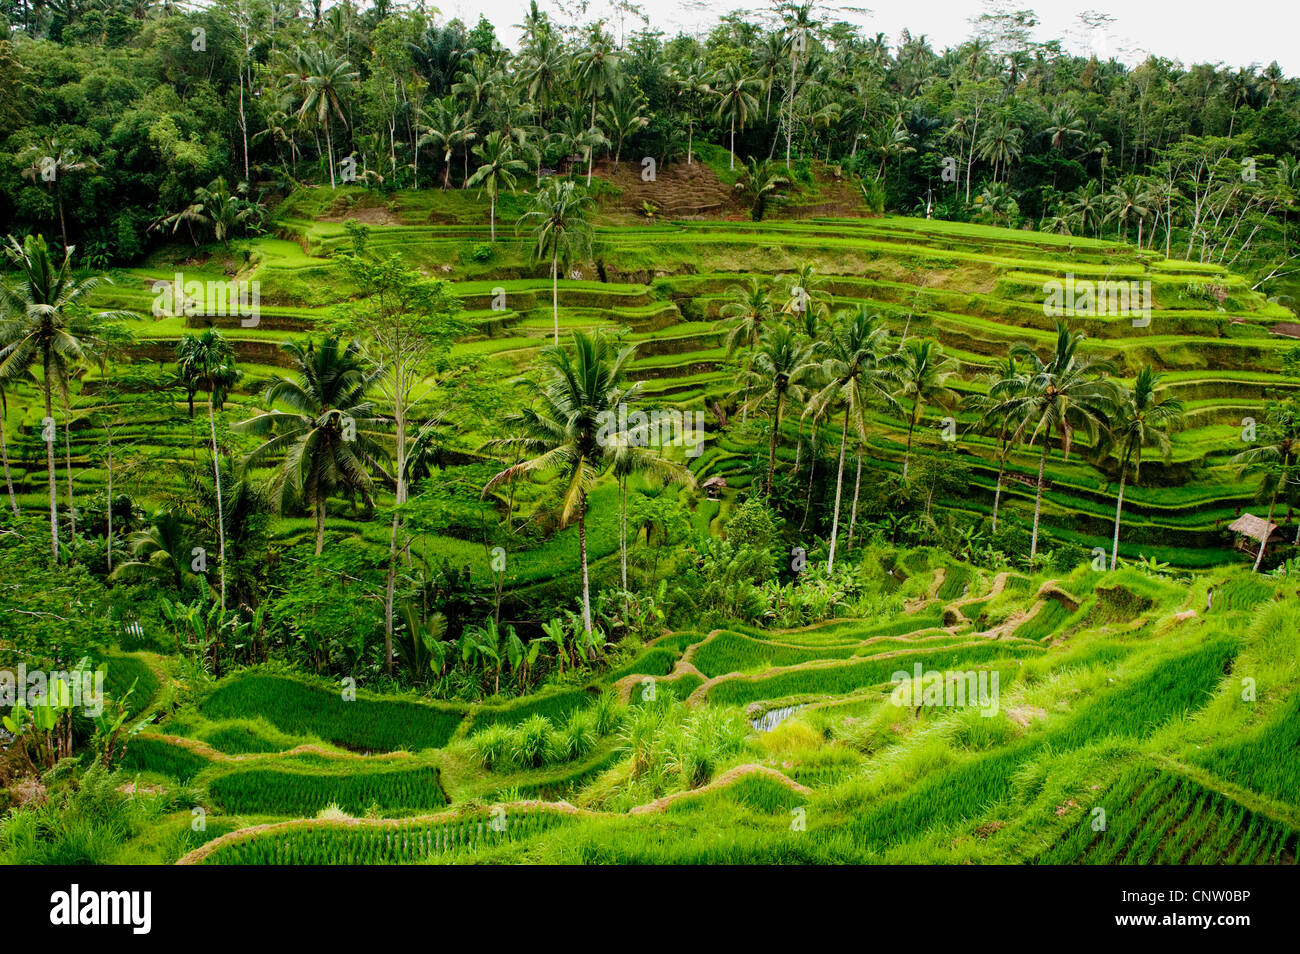 Some of the most spectacular and dramatic rice terraces in Bali, Indonesia are located in the Tegallalang area of central Bali. Stock Photo